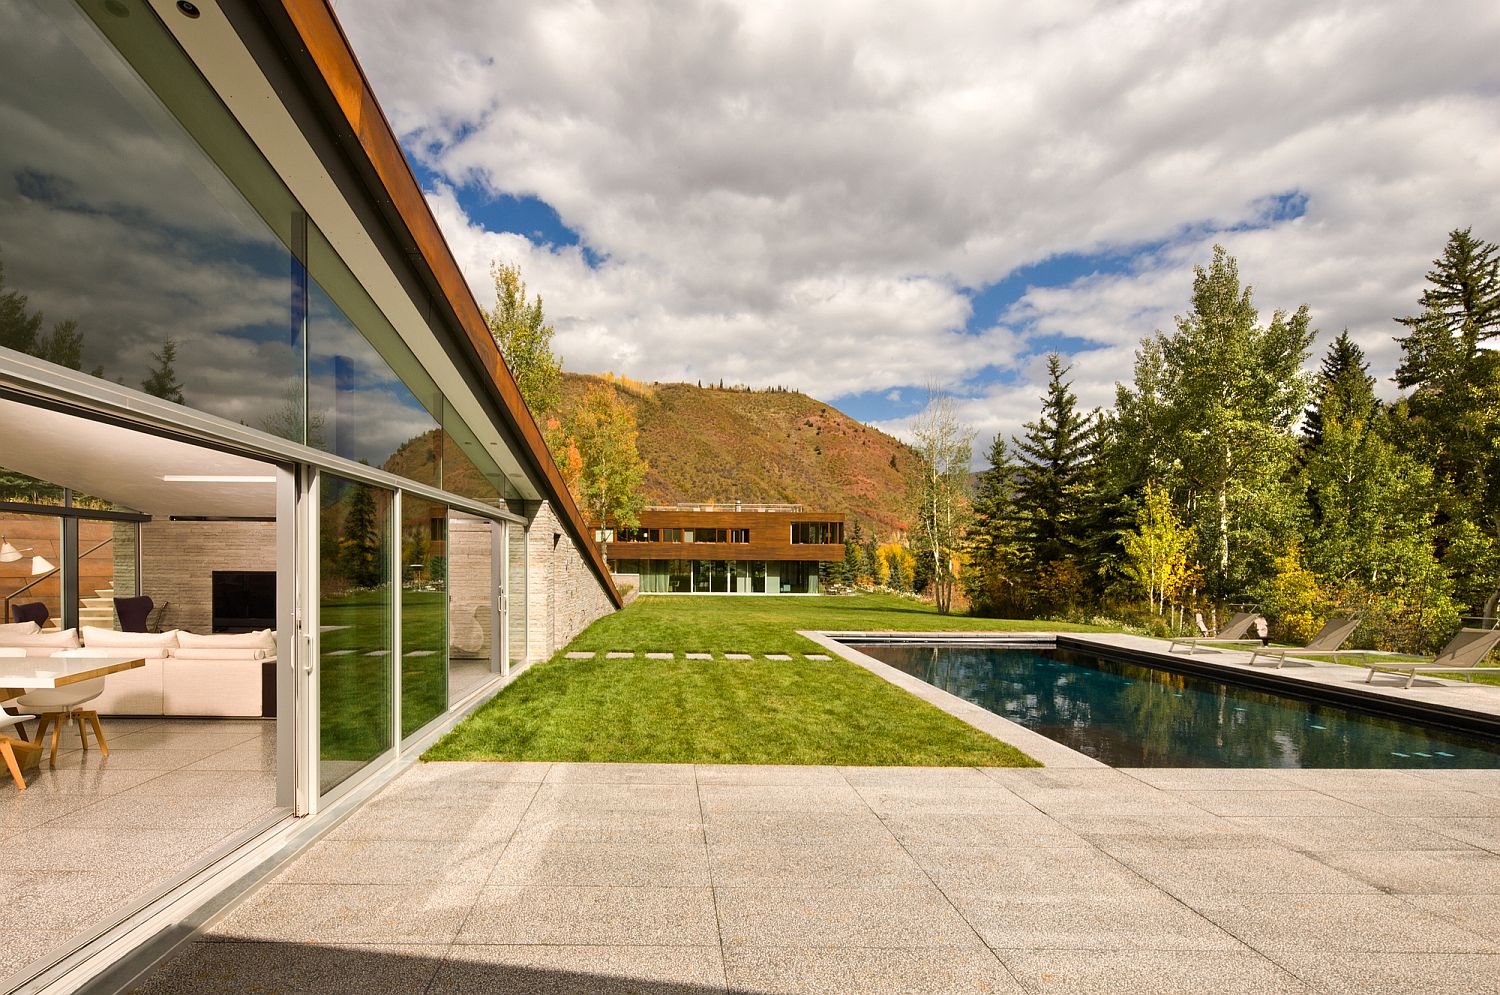 Pool-and-the-house-is-powered-largely-by-solar-energy